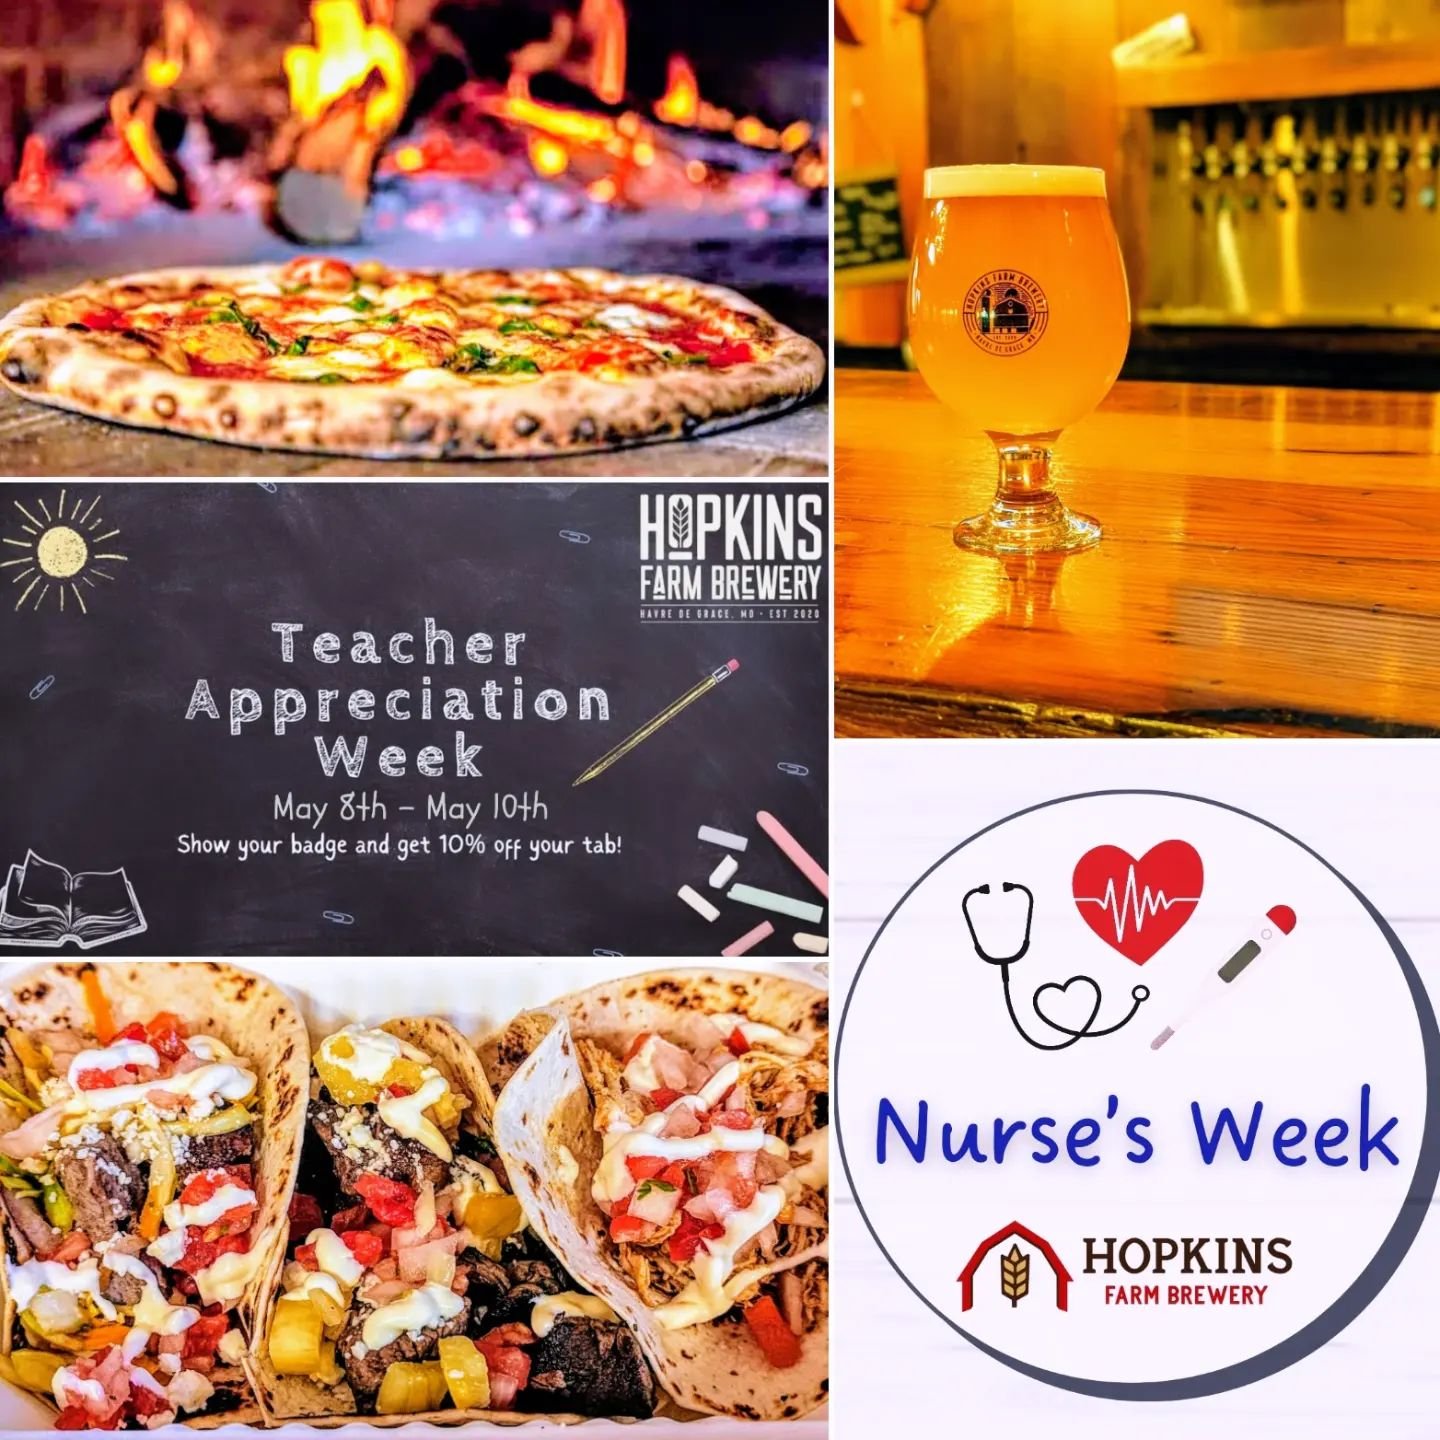 TGIF! We've got just what you need for a fun Friday night!

🍻16 farm fresh beers on tap 
📝Teacher Appreciation Week and Nurse's Week: show your ID and get 10% off your tab!🩺
🌮Village Bistro&nbsp;at 12PM
🍕@ThePitShack&nbsp;at 4PM
🎸@heighestreet 